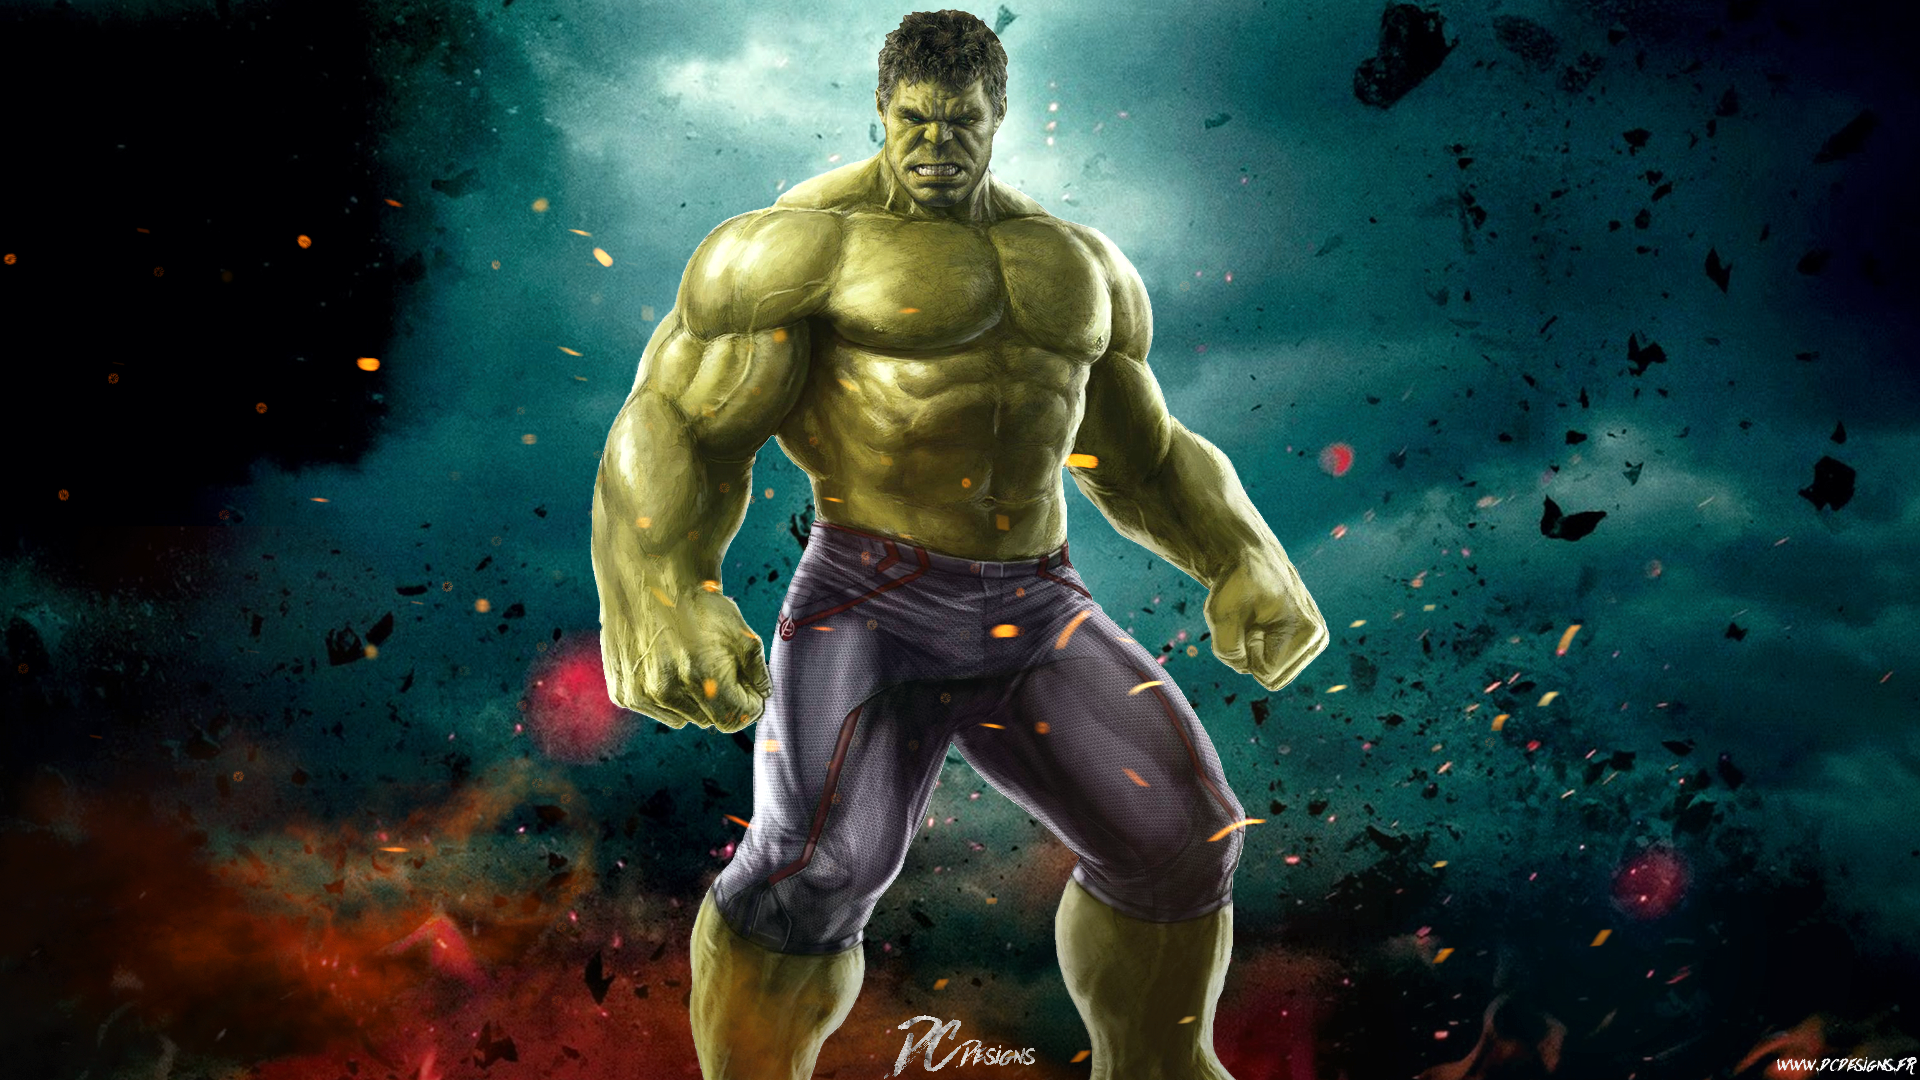 Free download hulk wallpaper in hd images in collection page x for your desktop mobile tablet explore hulk wallpaper hulk wallpaper hulk wallpapers hulk wallpapers